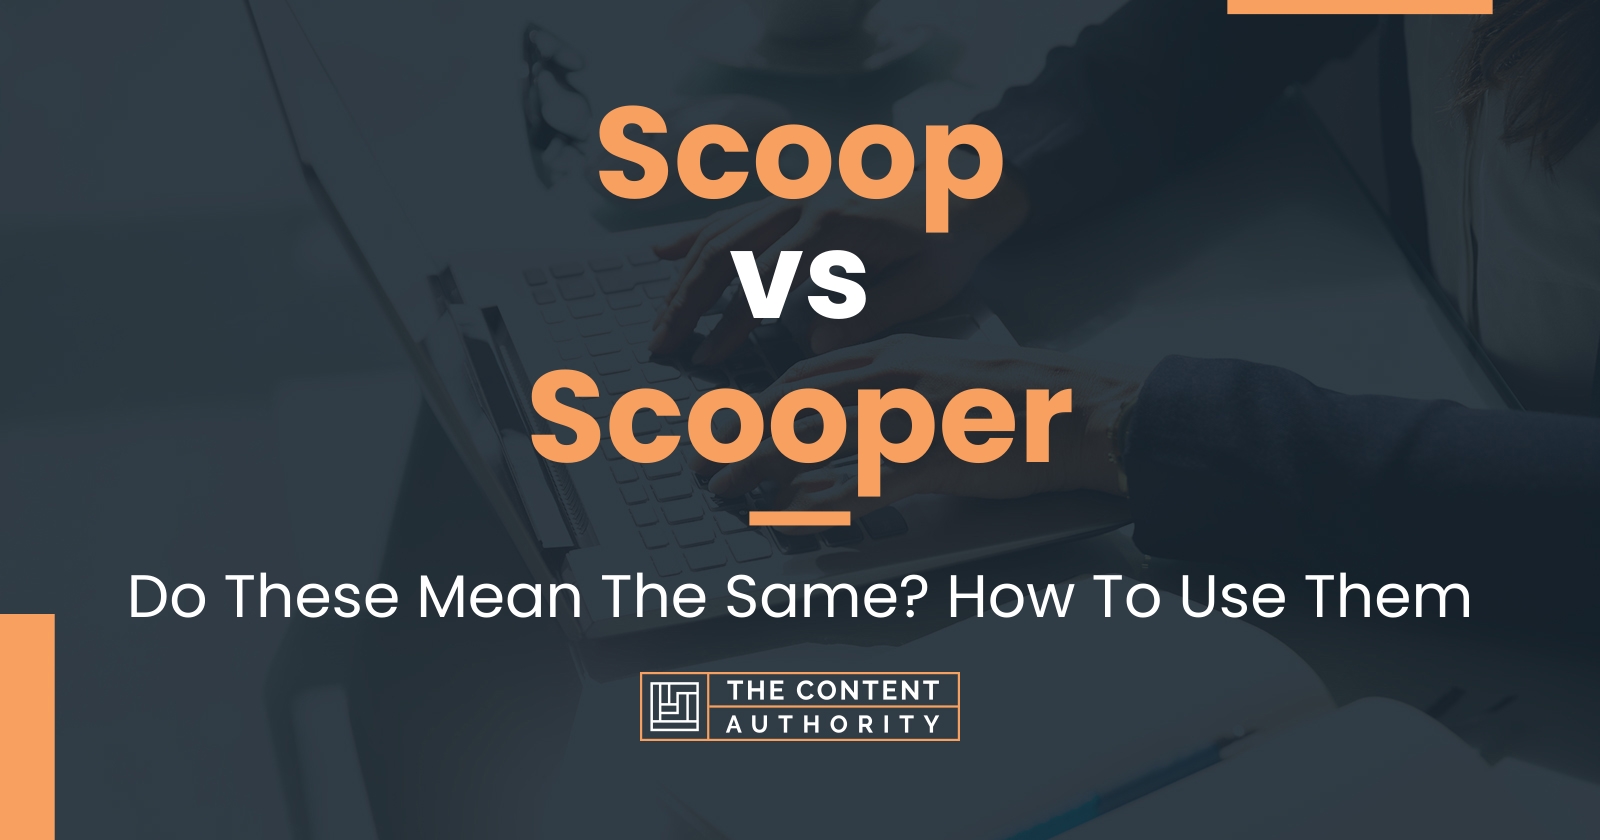 Scoop vs Scooper: Do These Mean The Same? How To Use Them